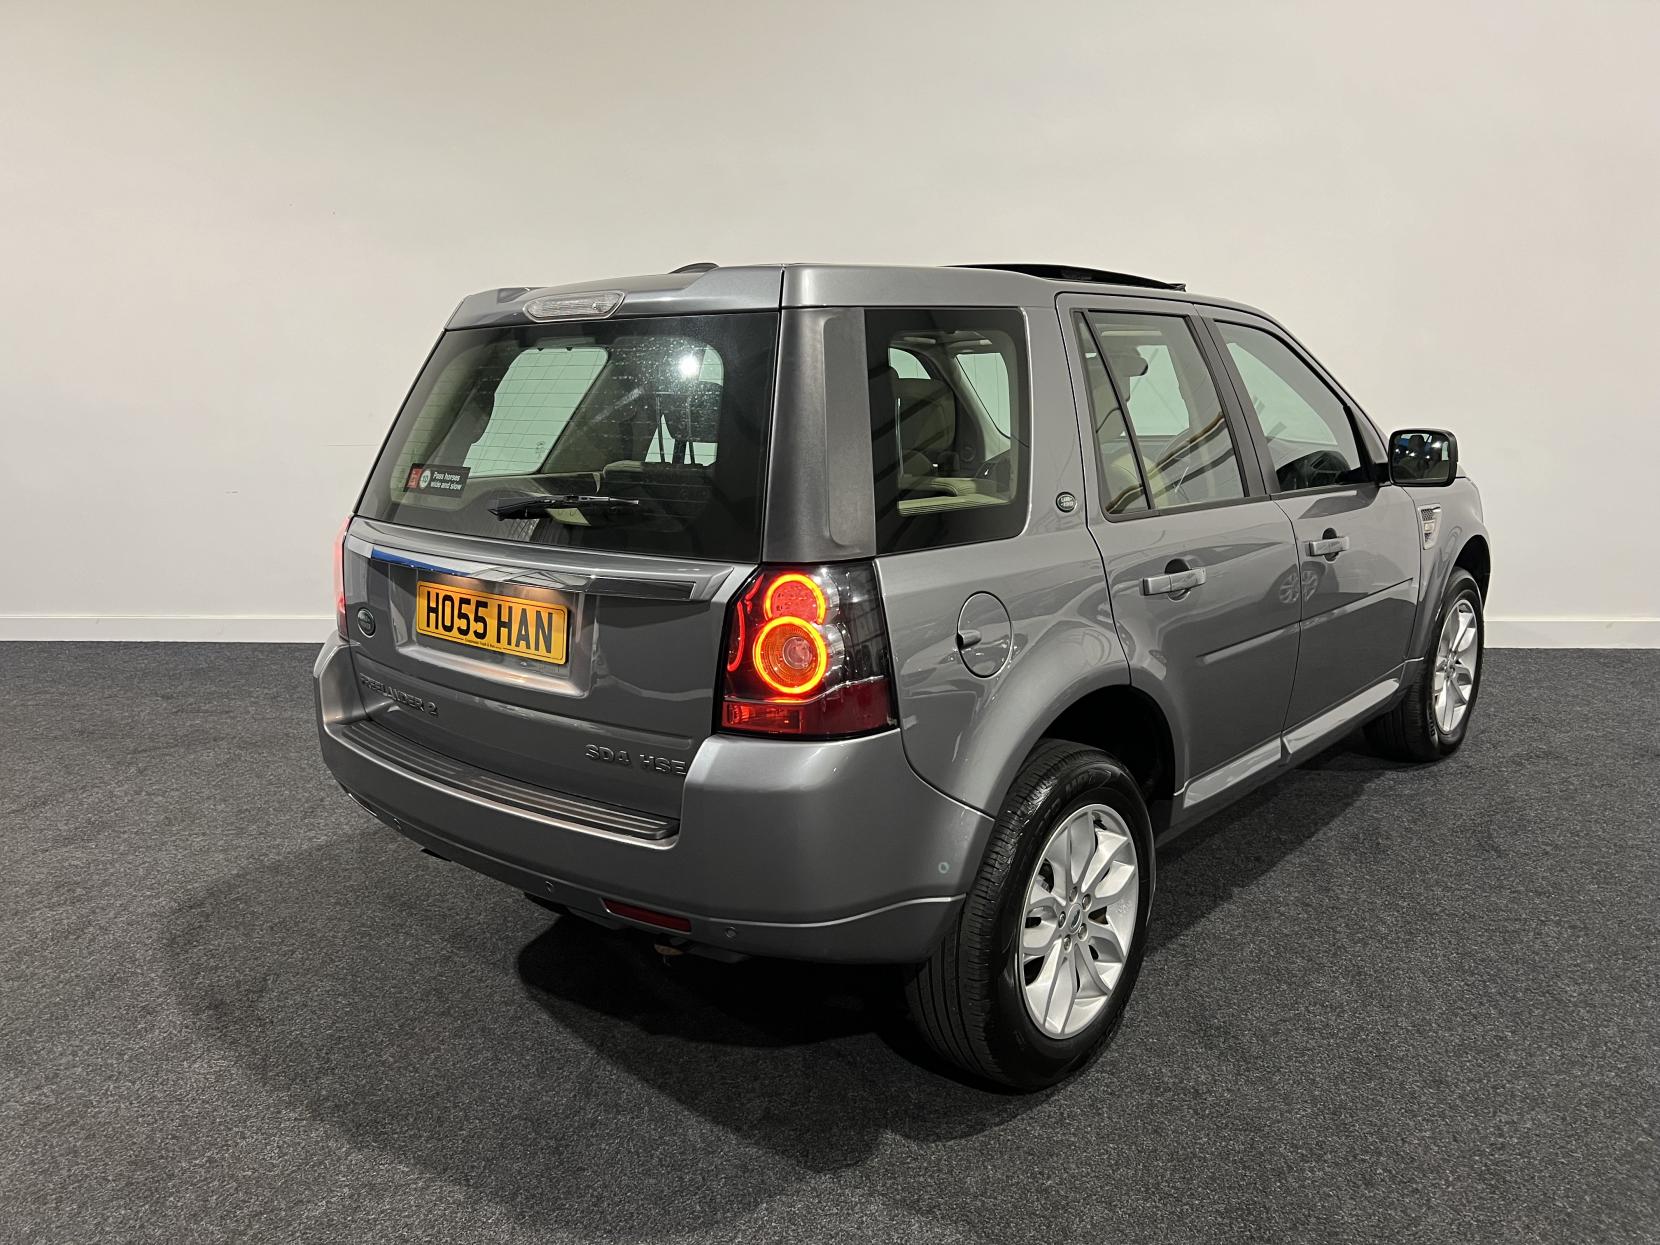 Land Rover Freelander 2 2.2 SD4 HSE SUV 5dr Diesel CommandShift 4WD Euro 5 (190 ps)